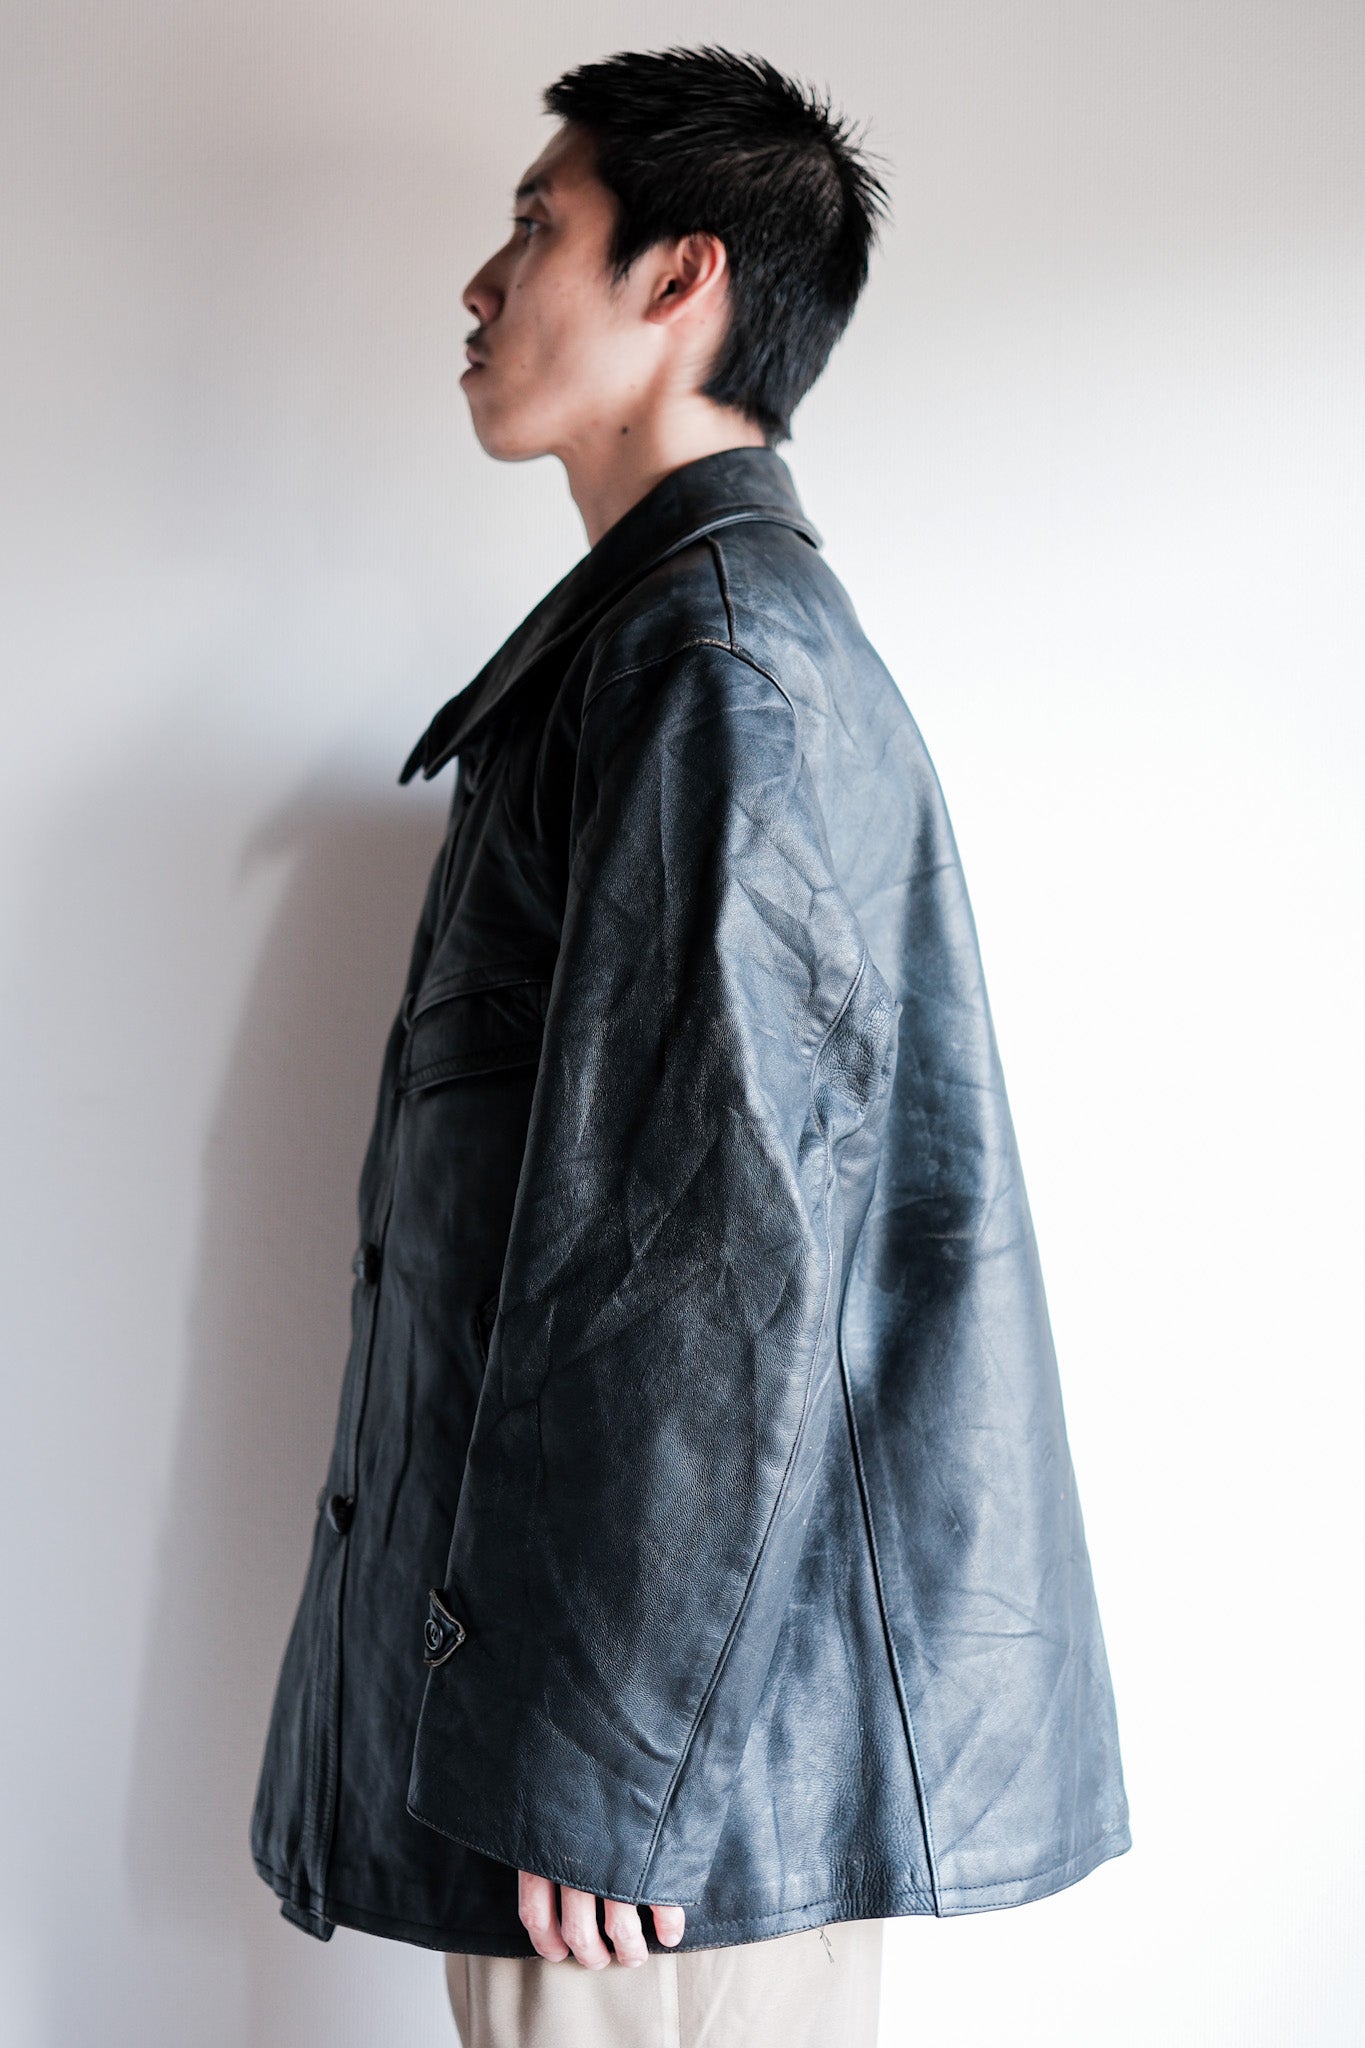 [~ 60's] French Vintage Le Corbusier Leather Work Jacket Size.56